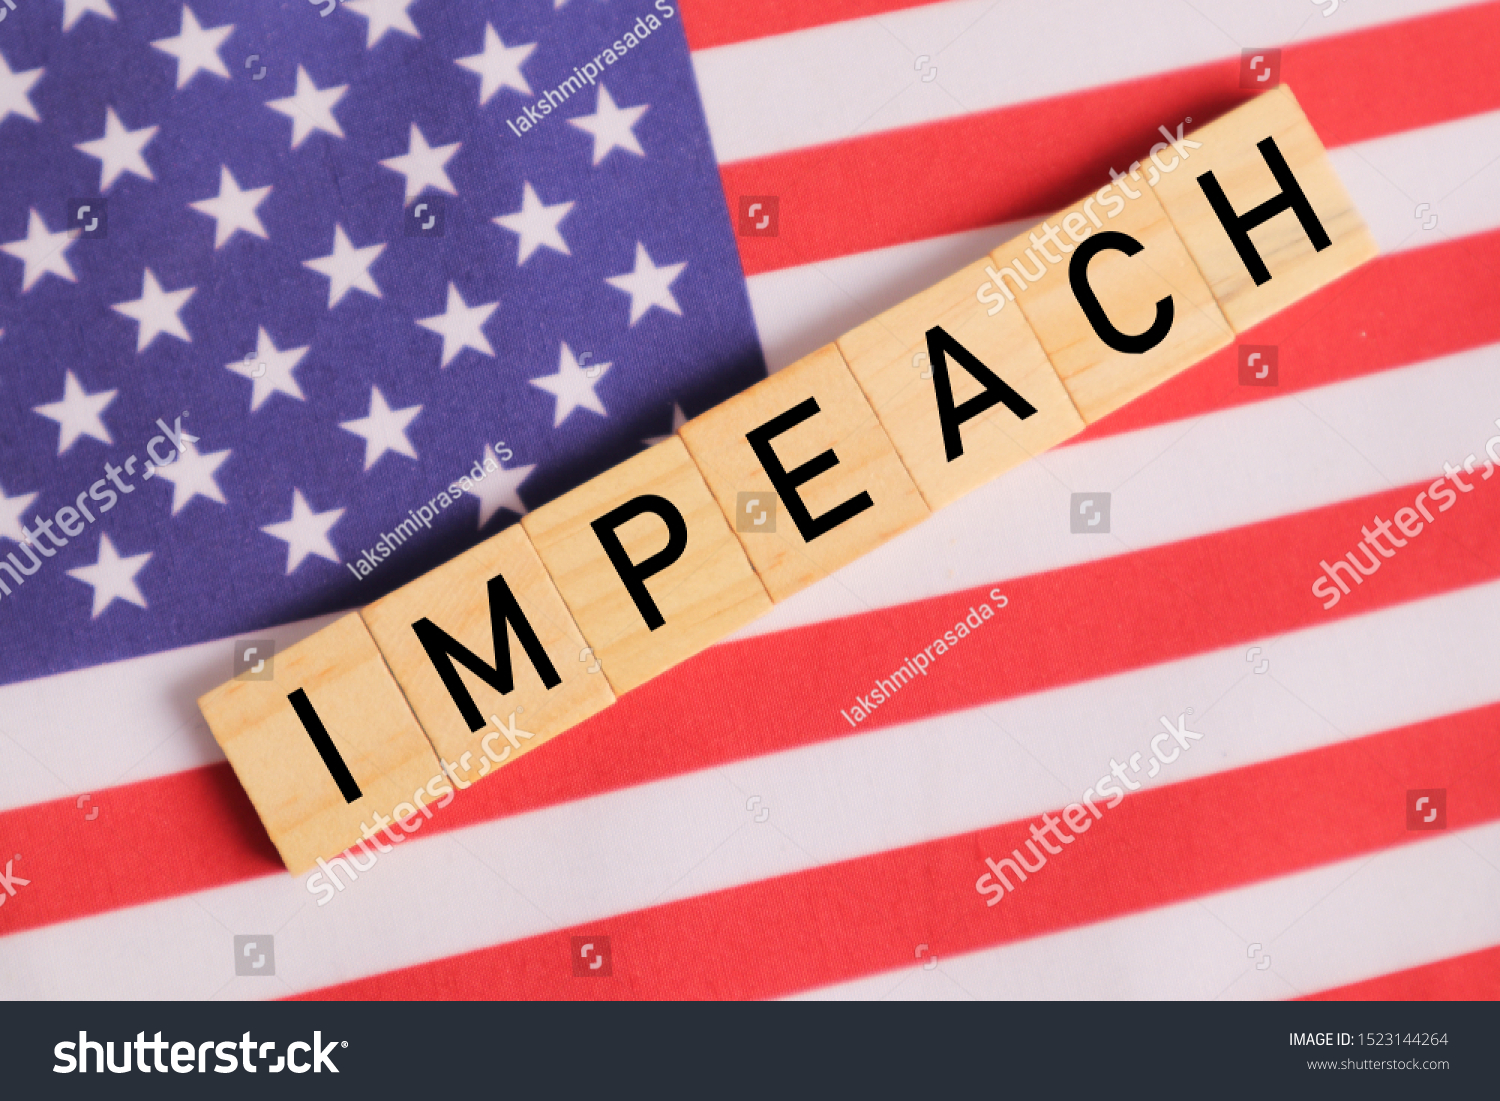 Concept of US politics, Impeachment showing with US flag with Impeach in wooden letters. #1523144264